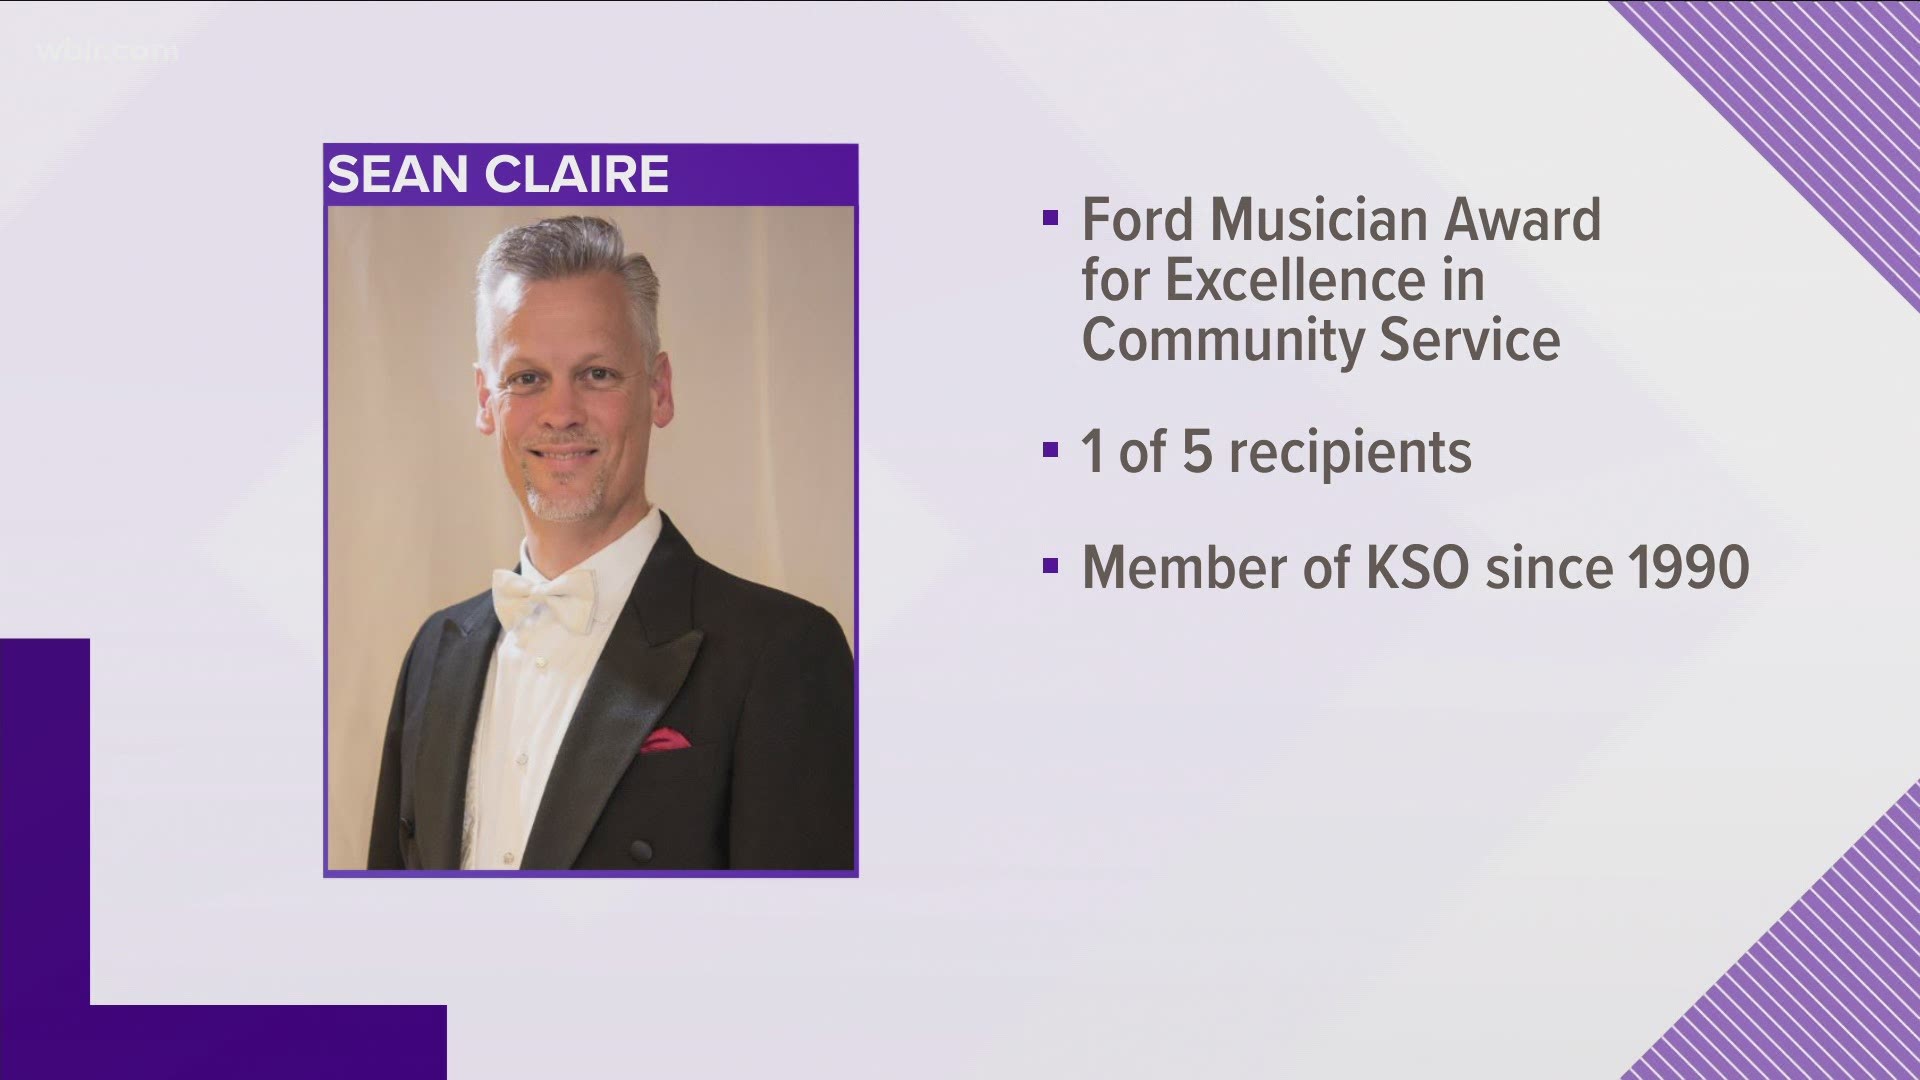 Sean Claire is one of just five orchestra musicians in the US to receive a Ford Musician Award for Excellence in Community Service.